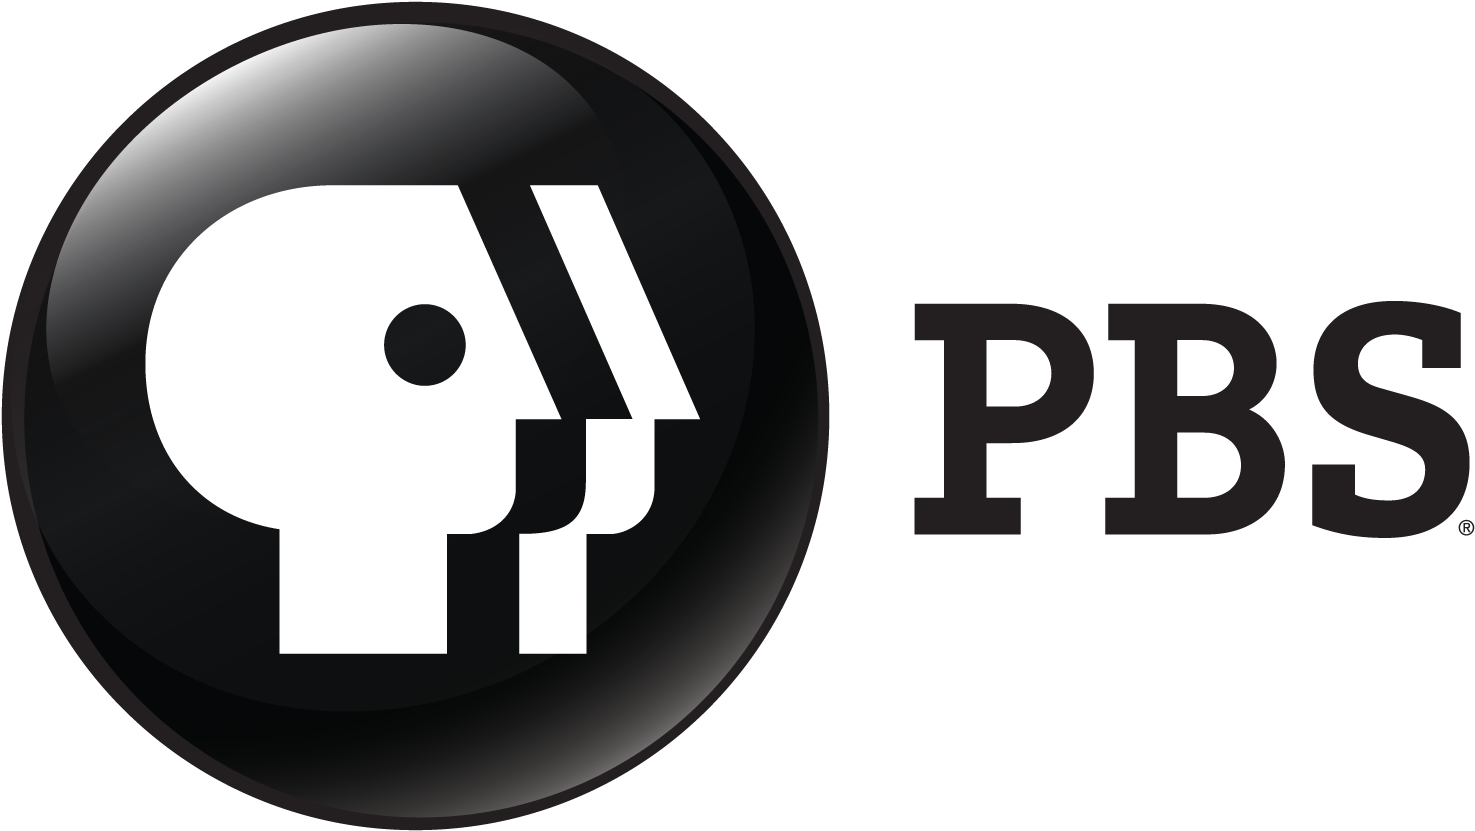 Pbs - Public Broadcasting (1920x1080), Png Download